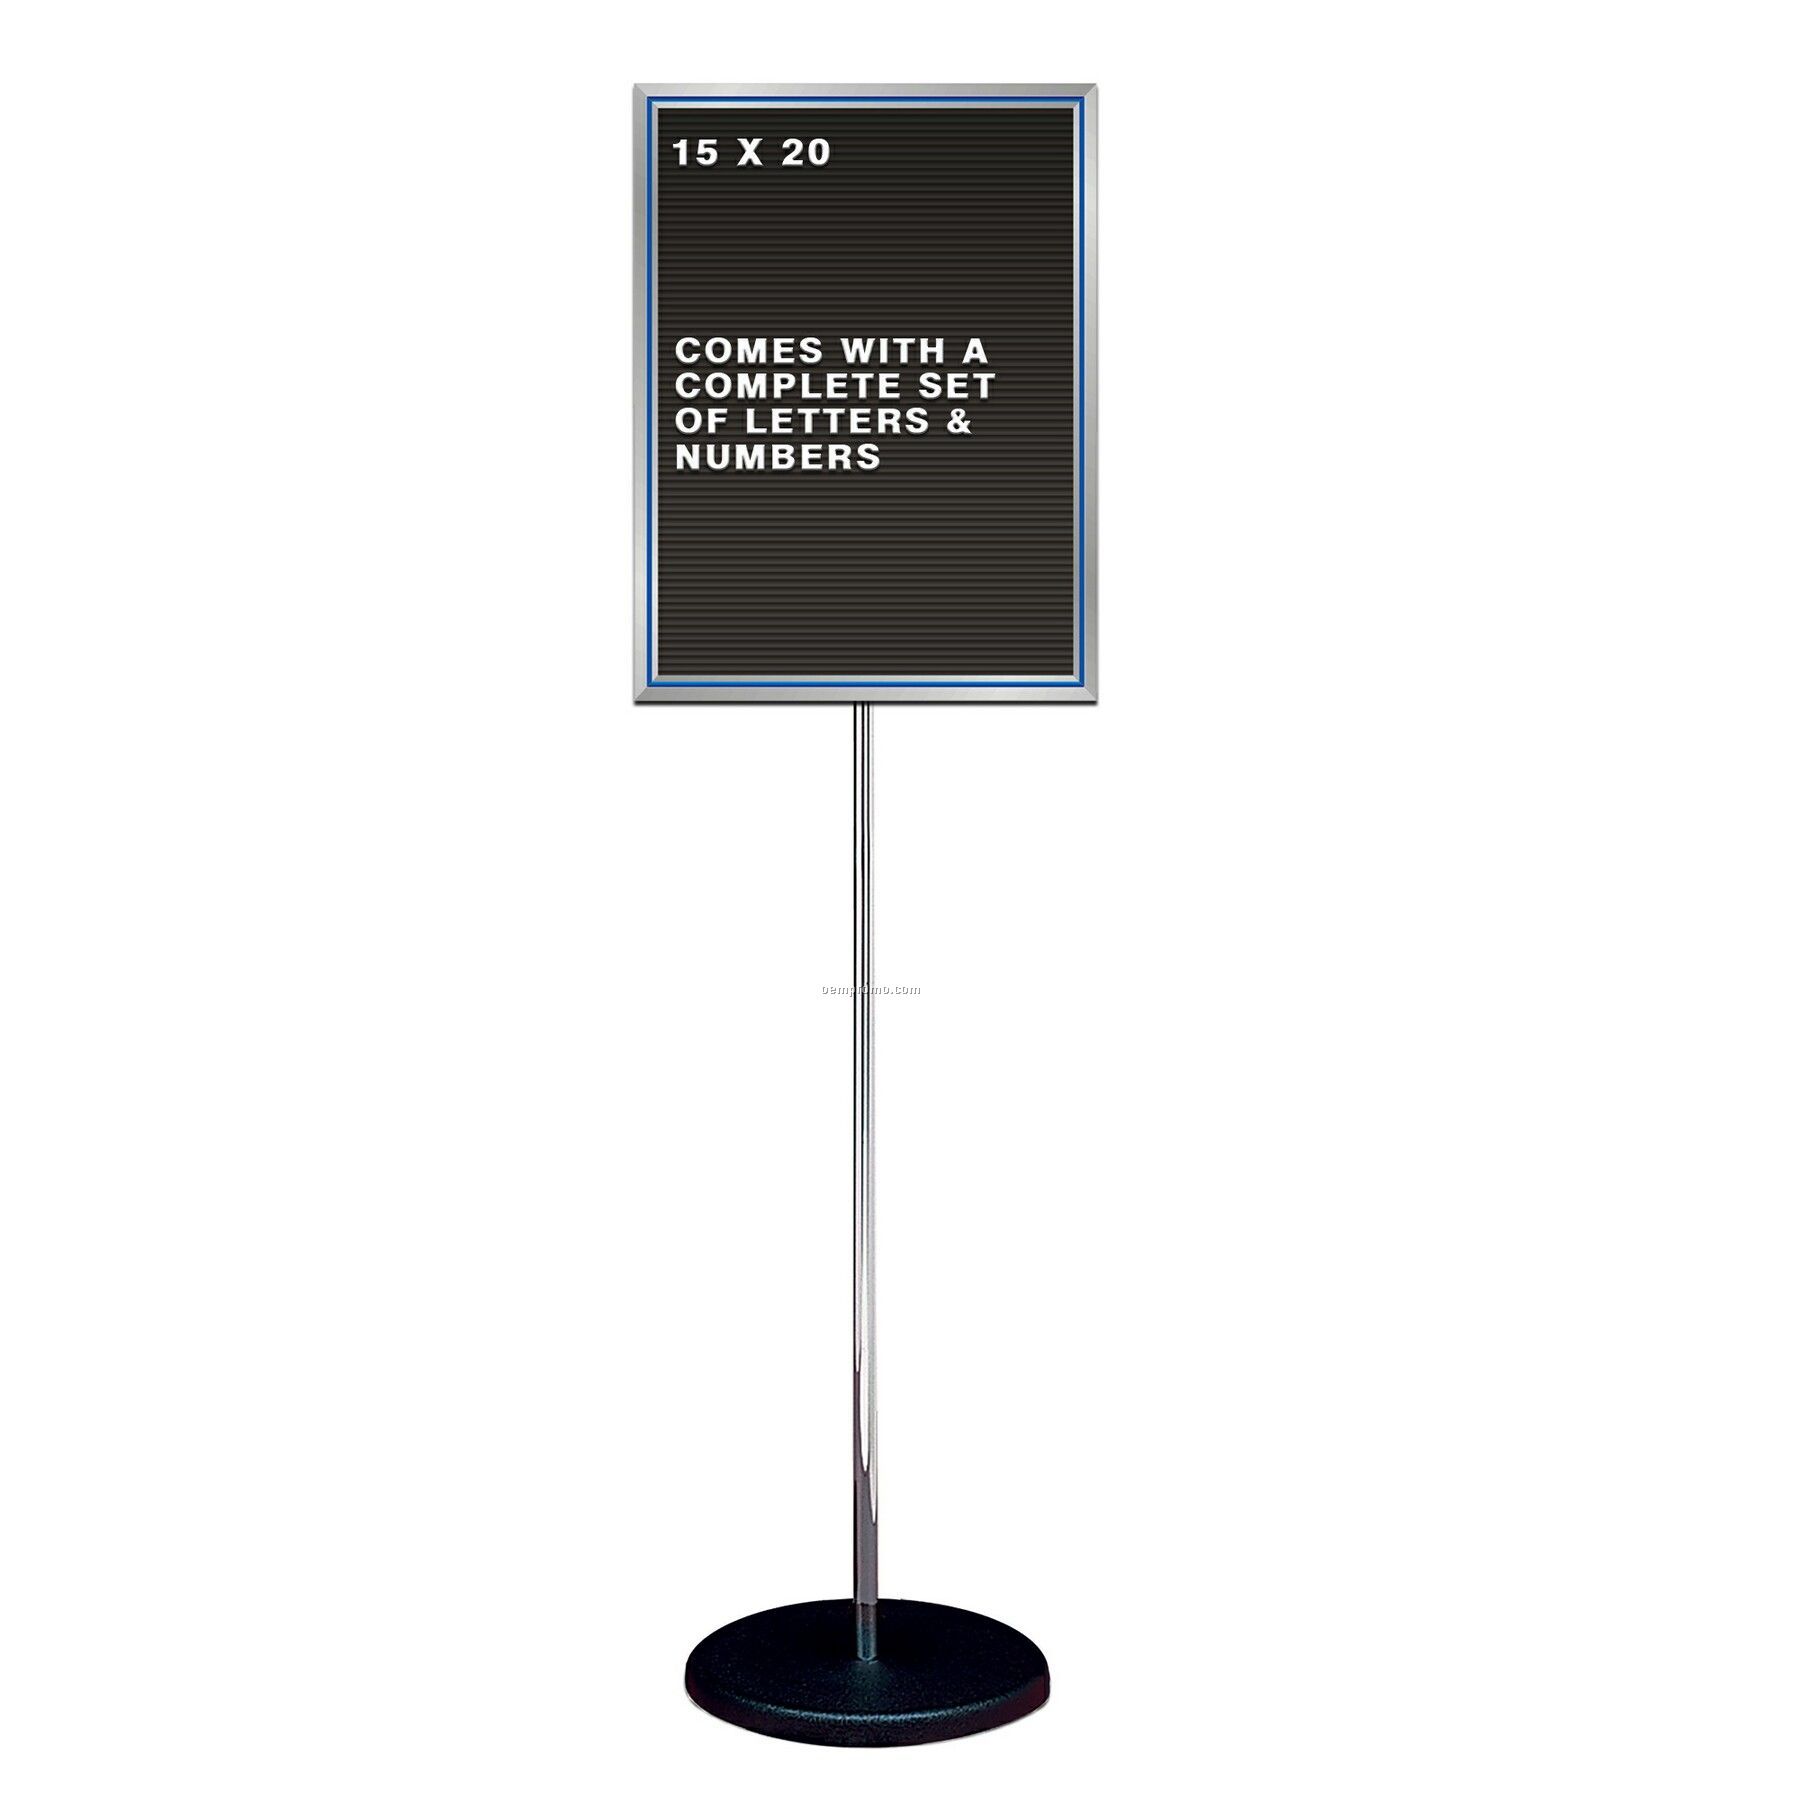 Free Standing Changeable Letter Board W/ Chrome Pole Stand (15"X20")